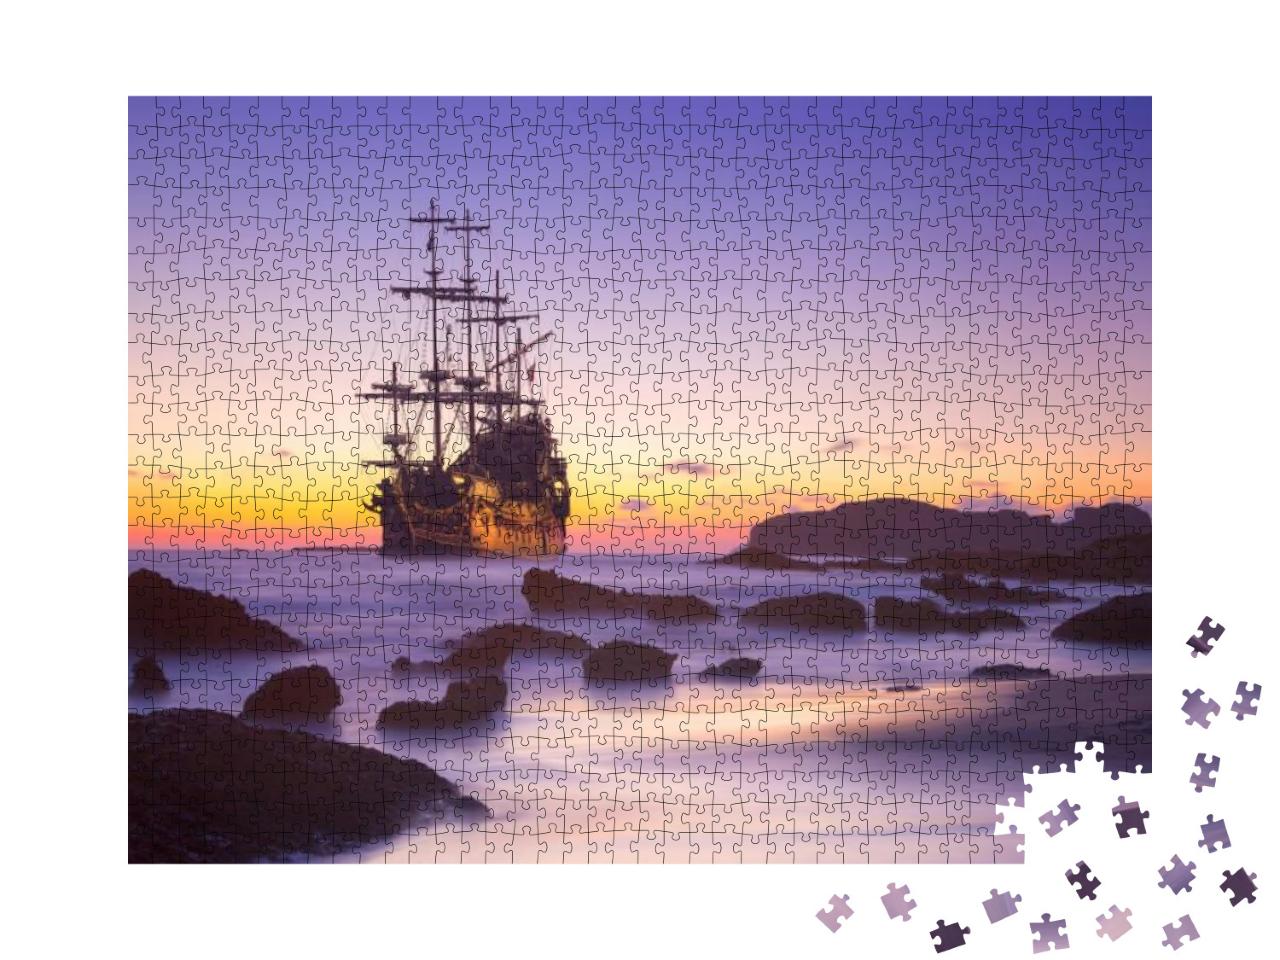 Pirate Ship At the Open Sea At the Sunset... Jigsaw Puzzle with 1000 pieces